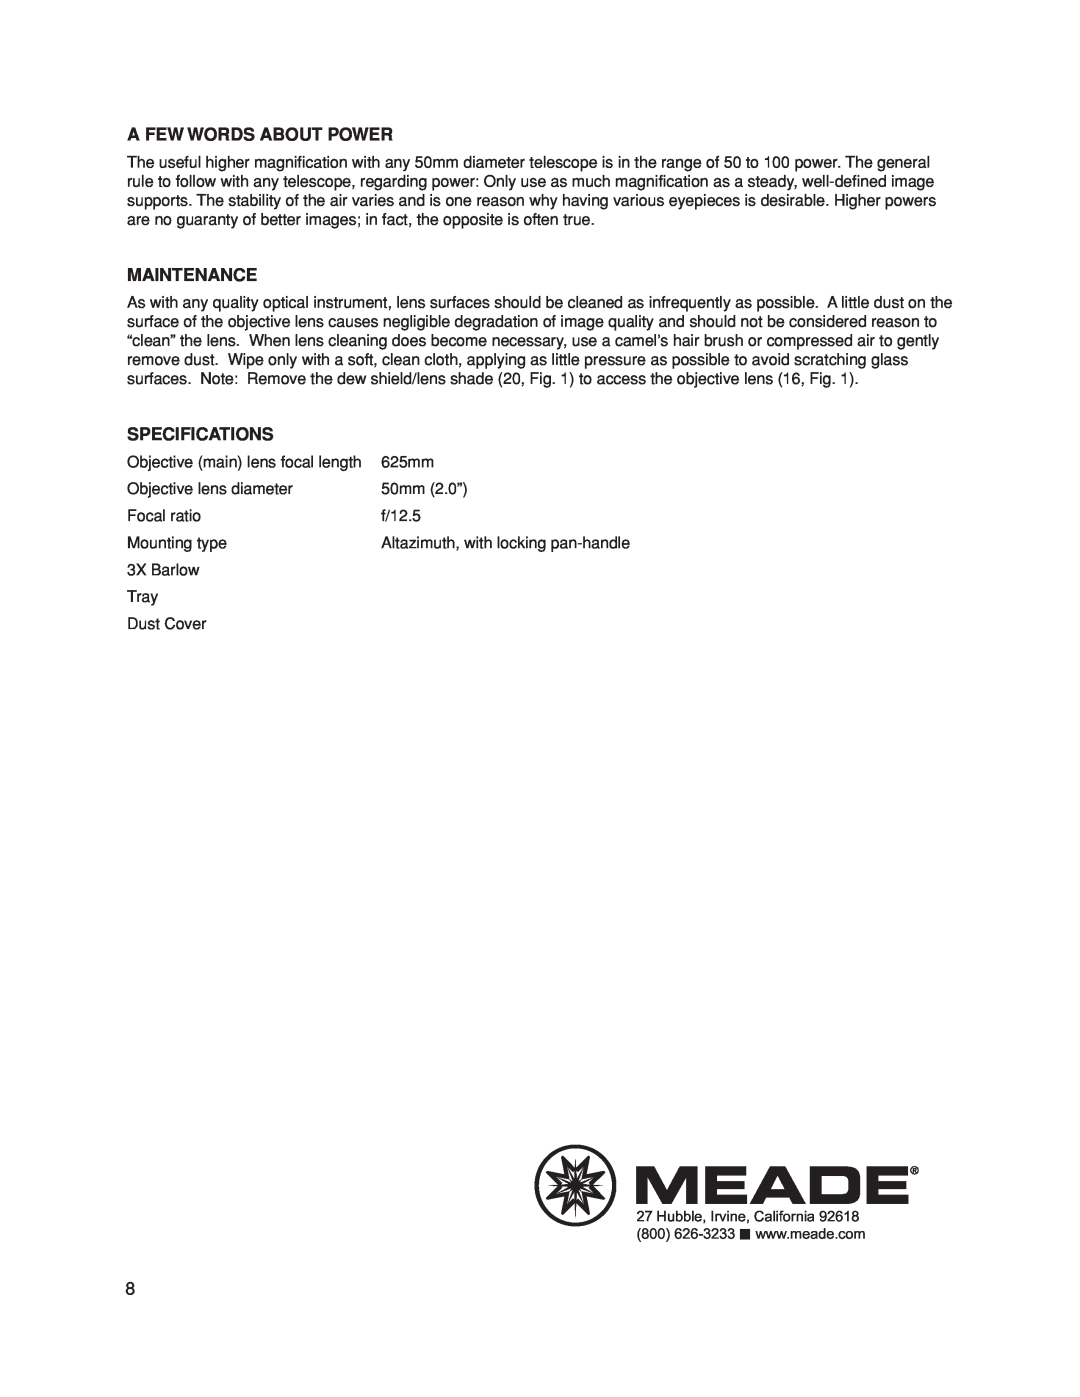 Meade Meade 50AZ-P instruction manual A Few Words About Power, Maintenance, Specifications 